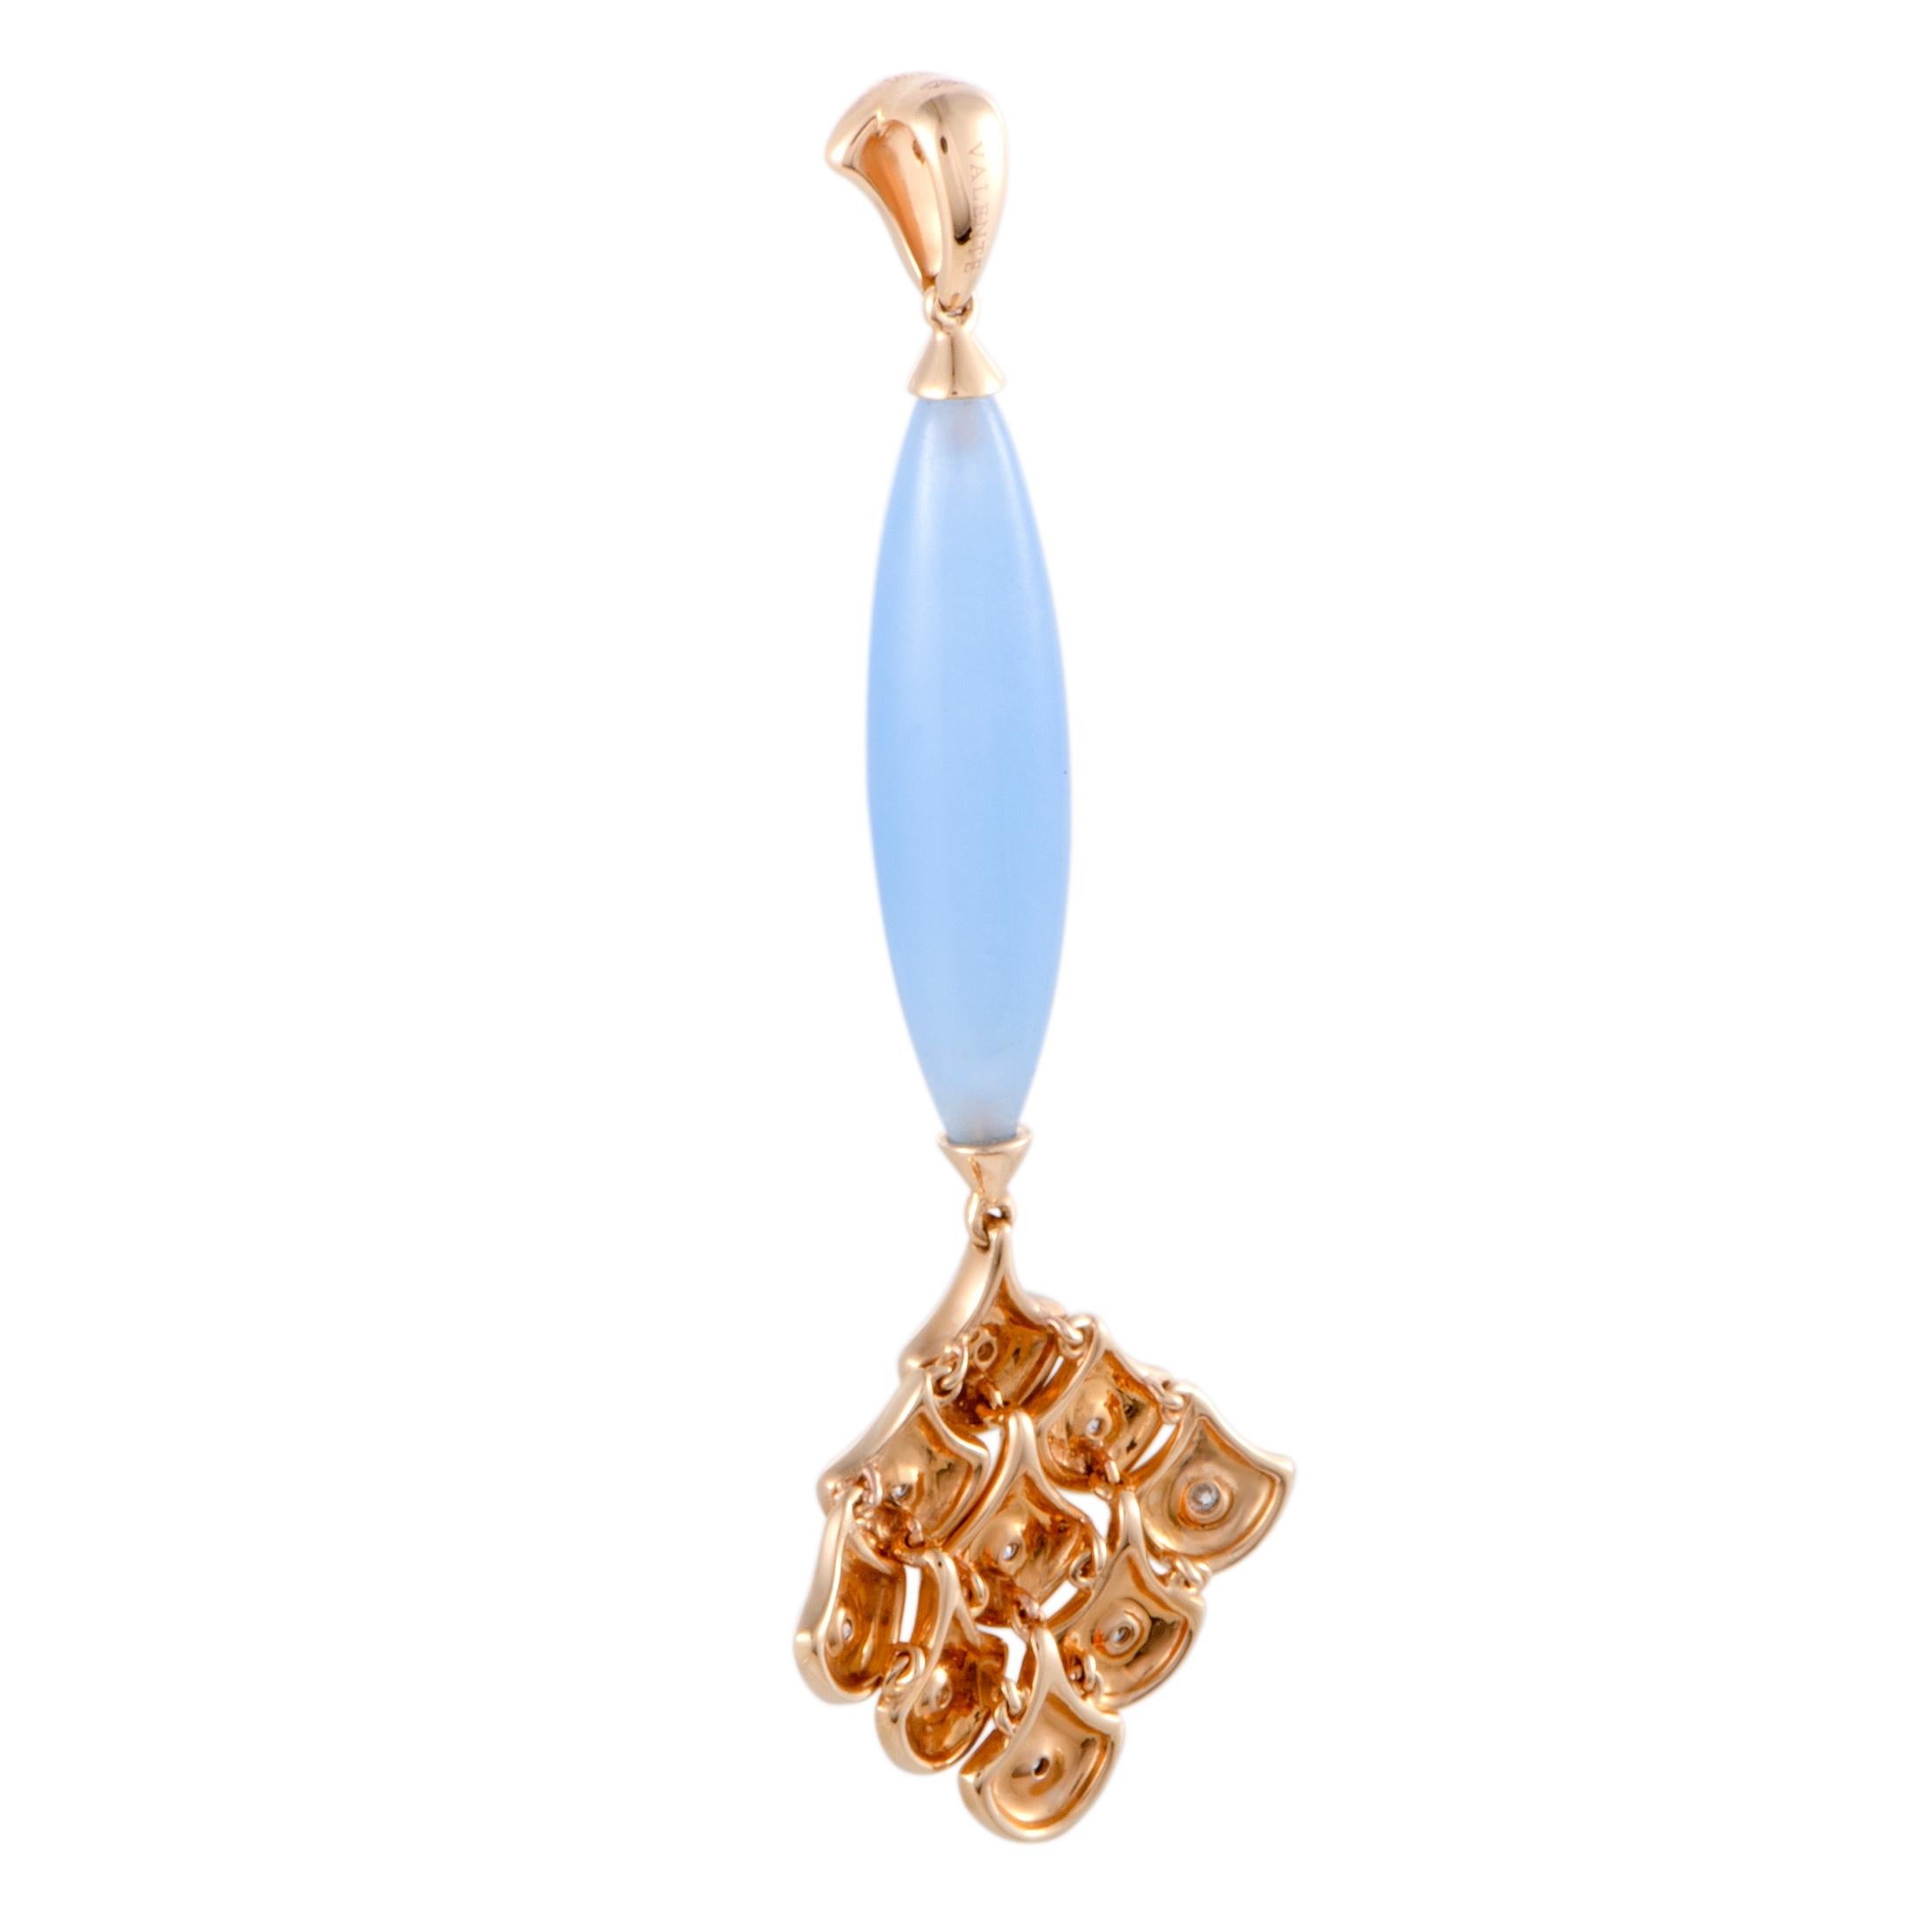 Featuring a splendidly contrasting combination of radiant rose gold and enticing blue quartz, this delightful pendant offers an attractively elegant appearance. The pendant is beautifully designed by Valente and it is expertly crafted from feminine